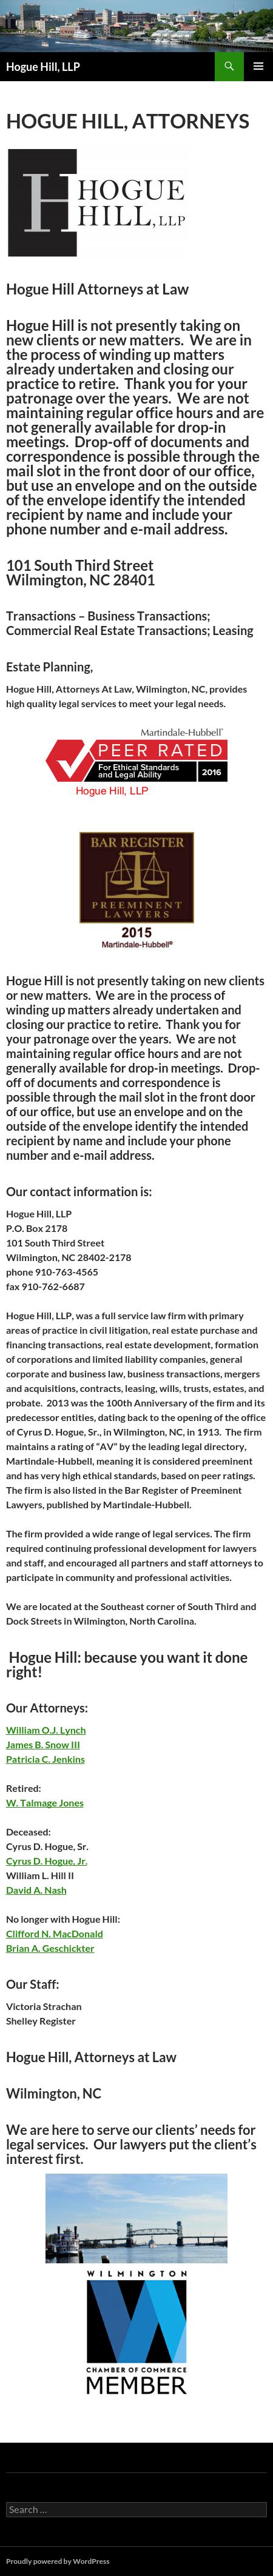 Hogue Hill PLLC - Wilmington NC Lawyers